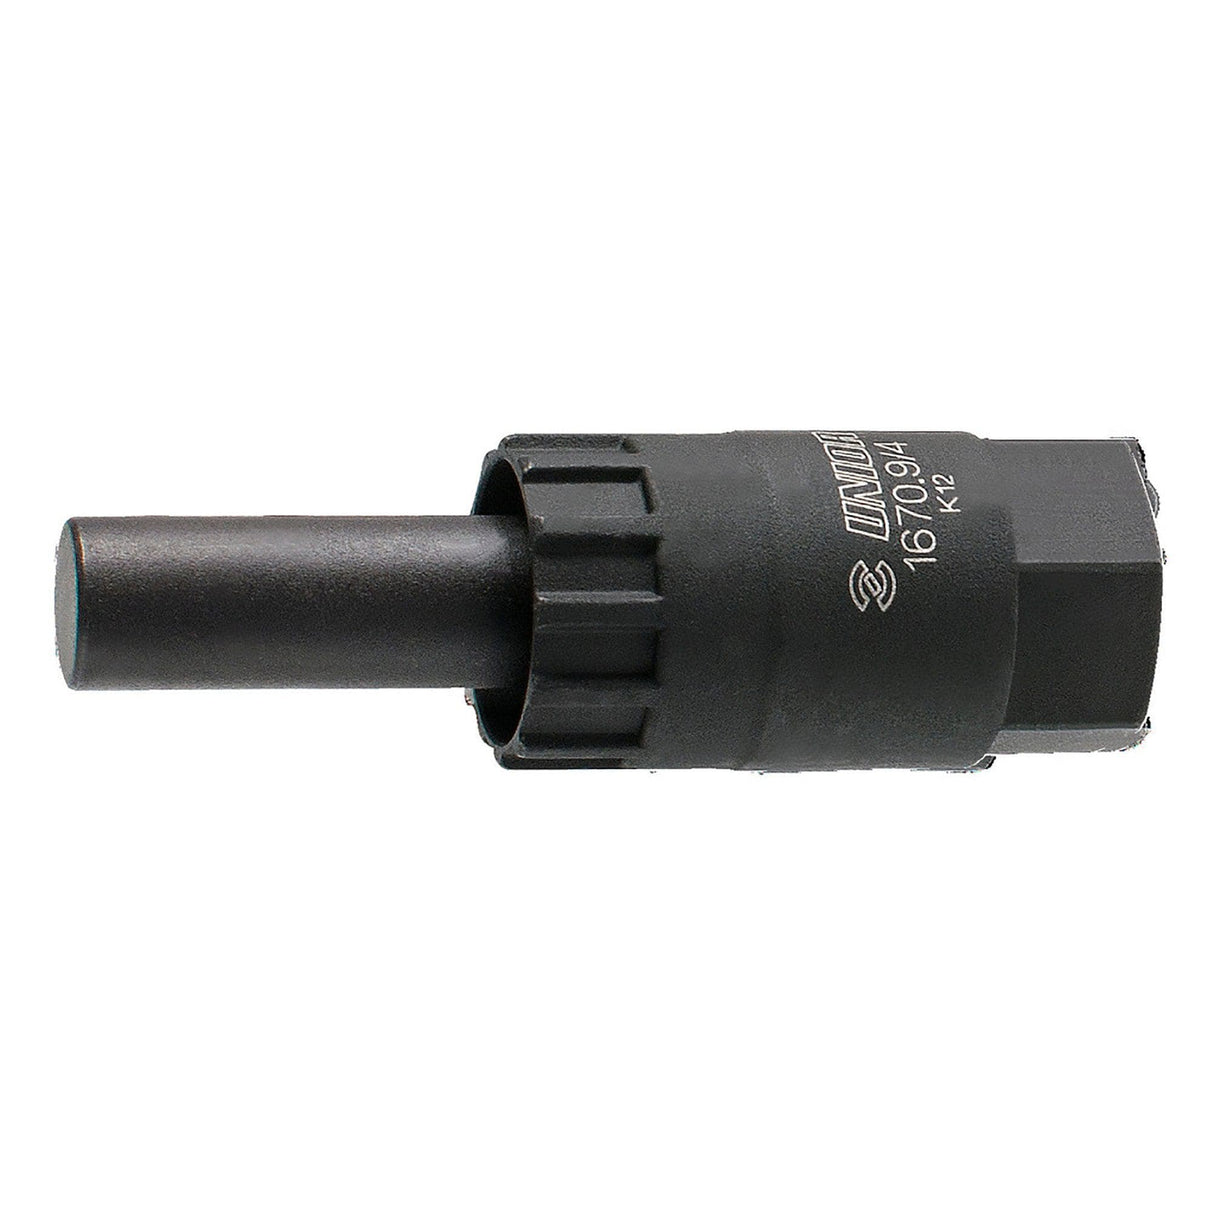 Unior Cassette Lockring Tool With 12Mm Guide: